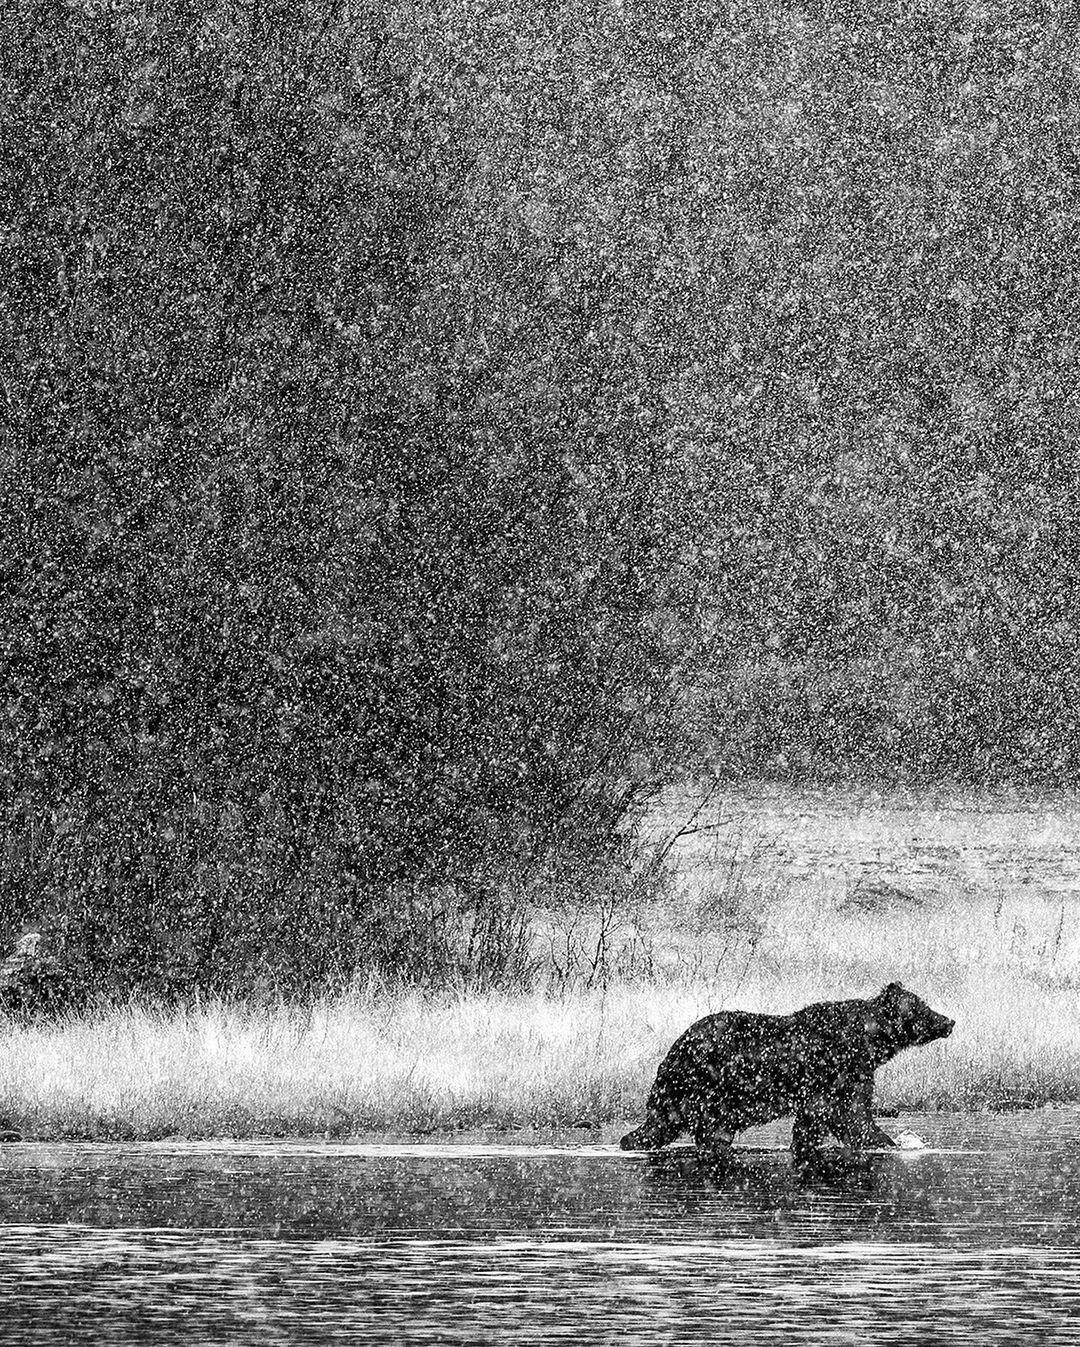 image  1 Paul Nicklen - “Path of the Grizzly,” Day 25 of 75 Days of Art